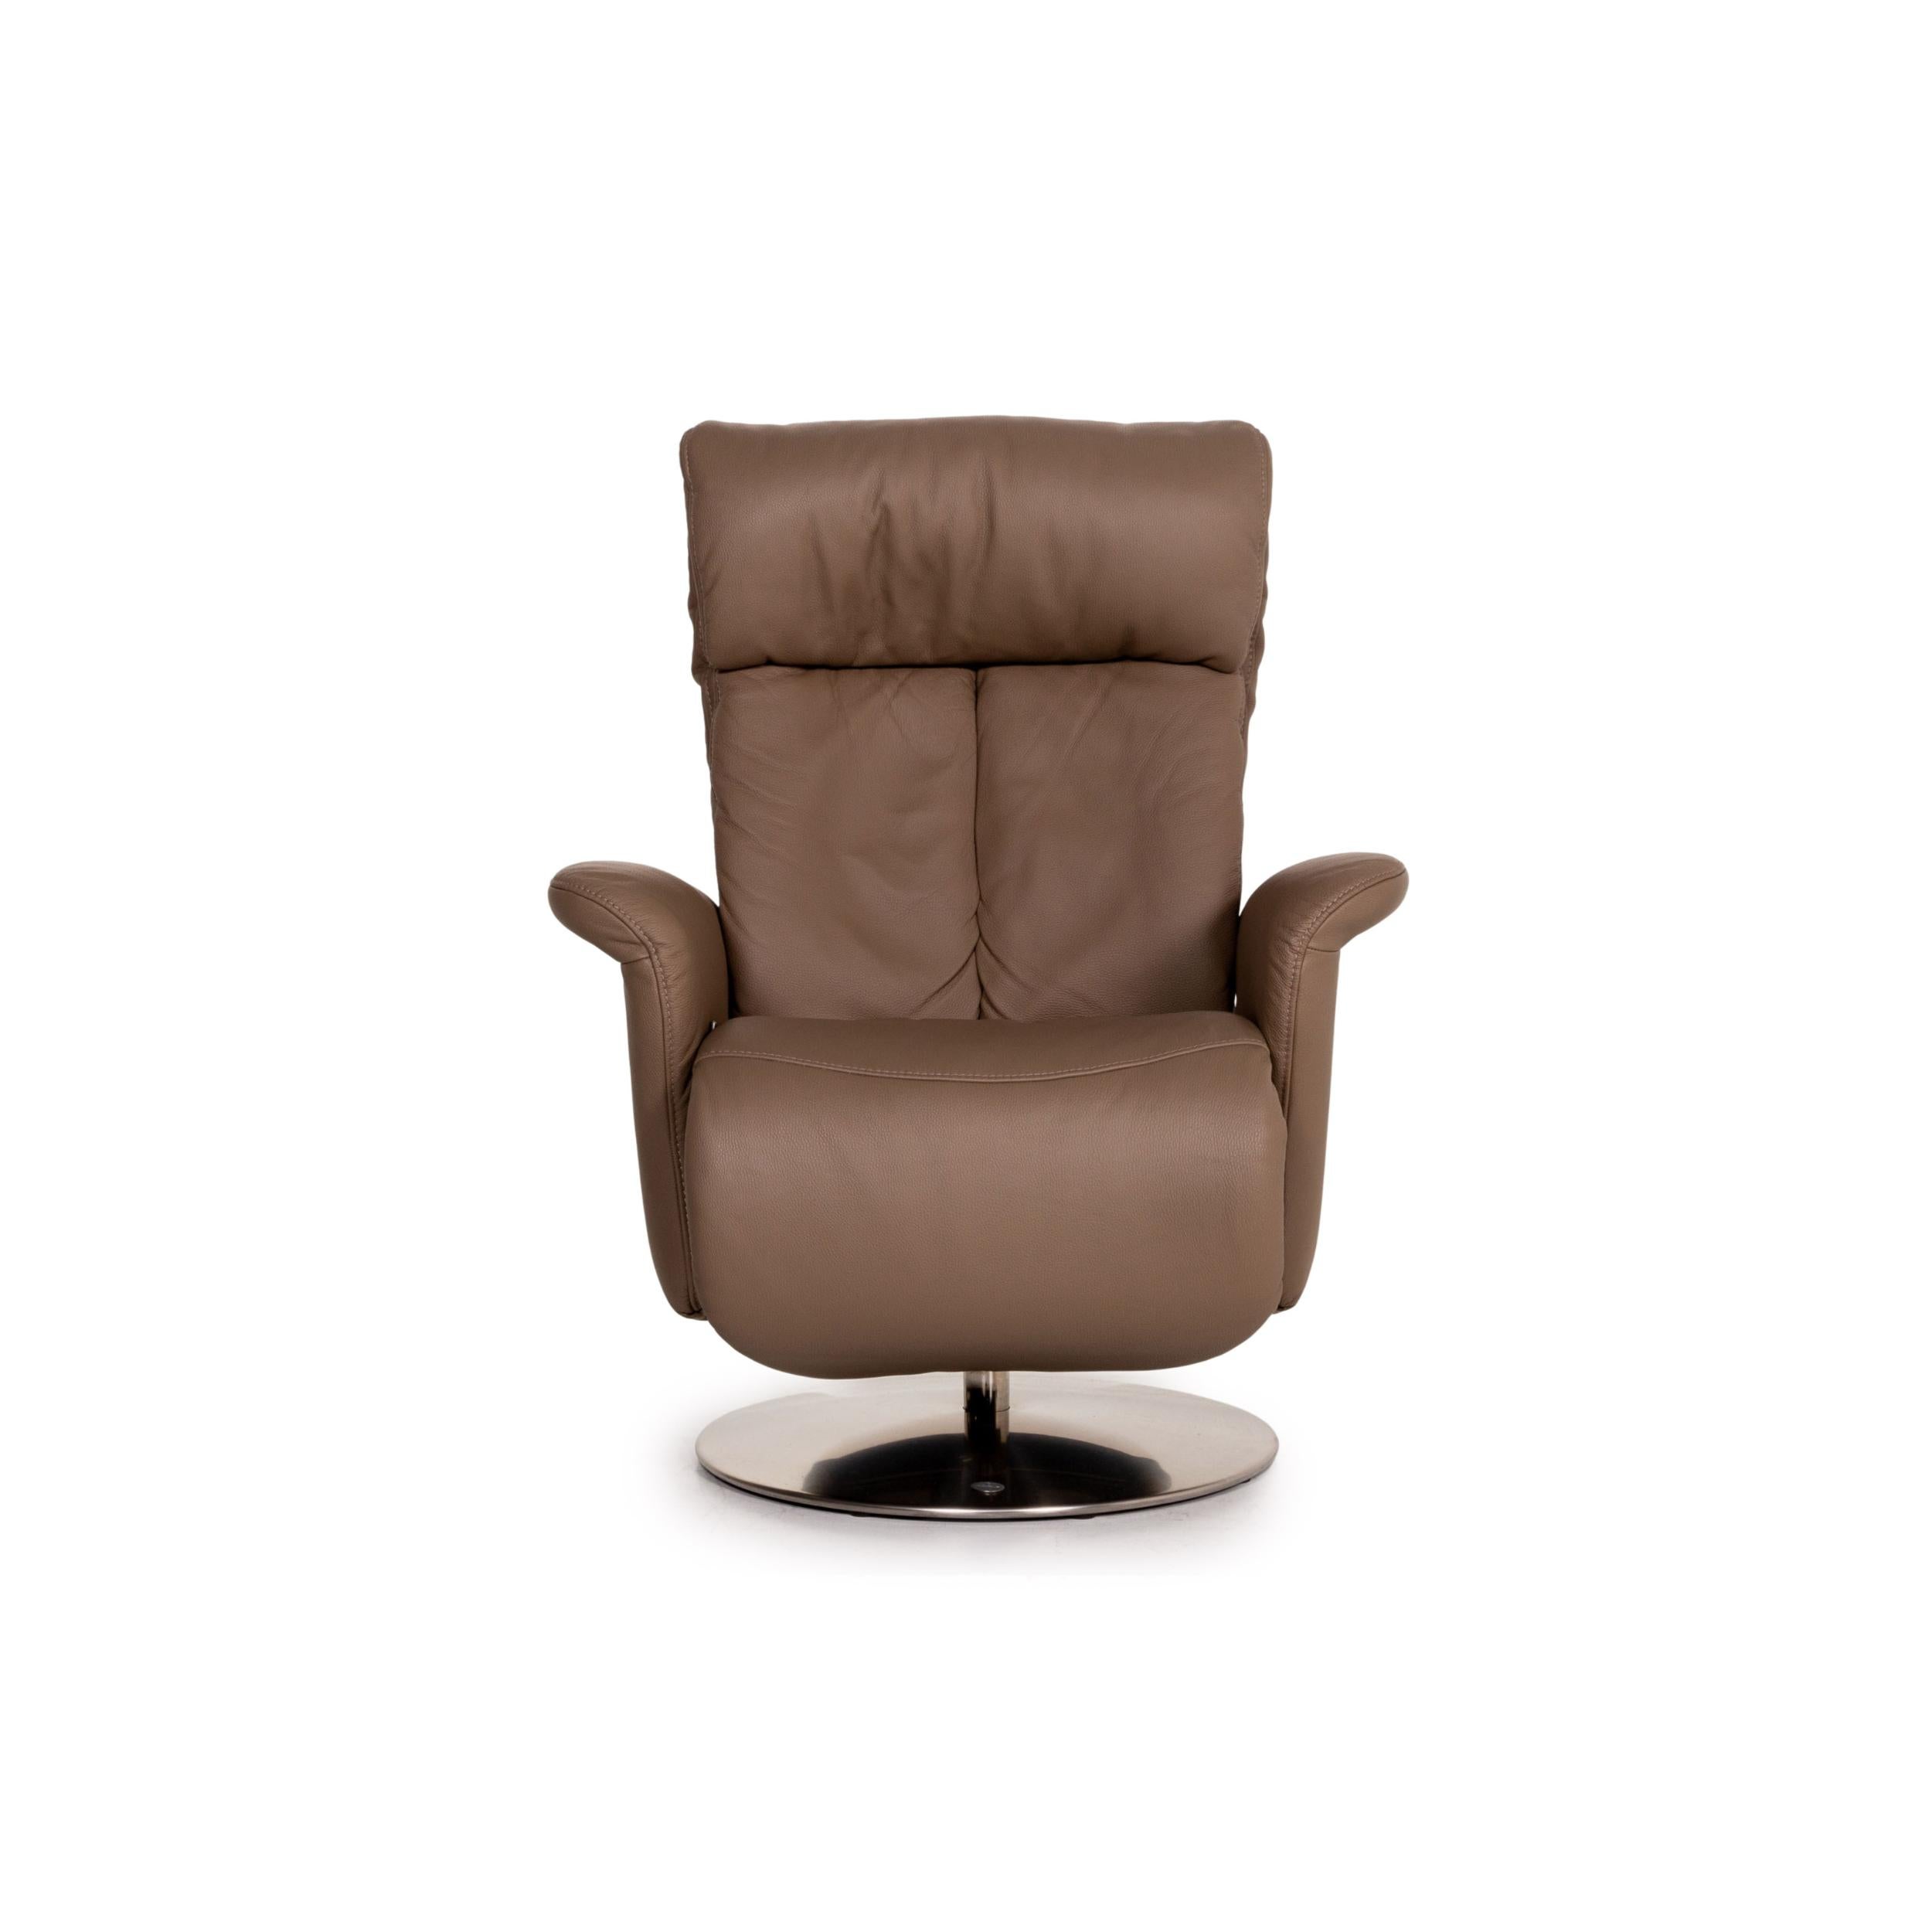 Himolla 7227 Leather Armchair Brown Relaxation Function Function Relaxation For Sale 2